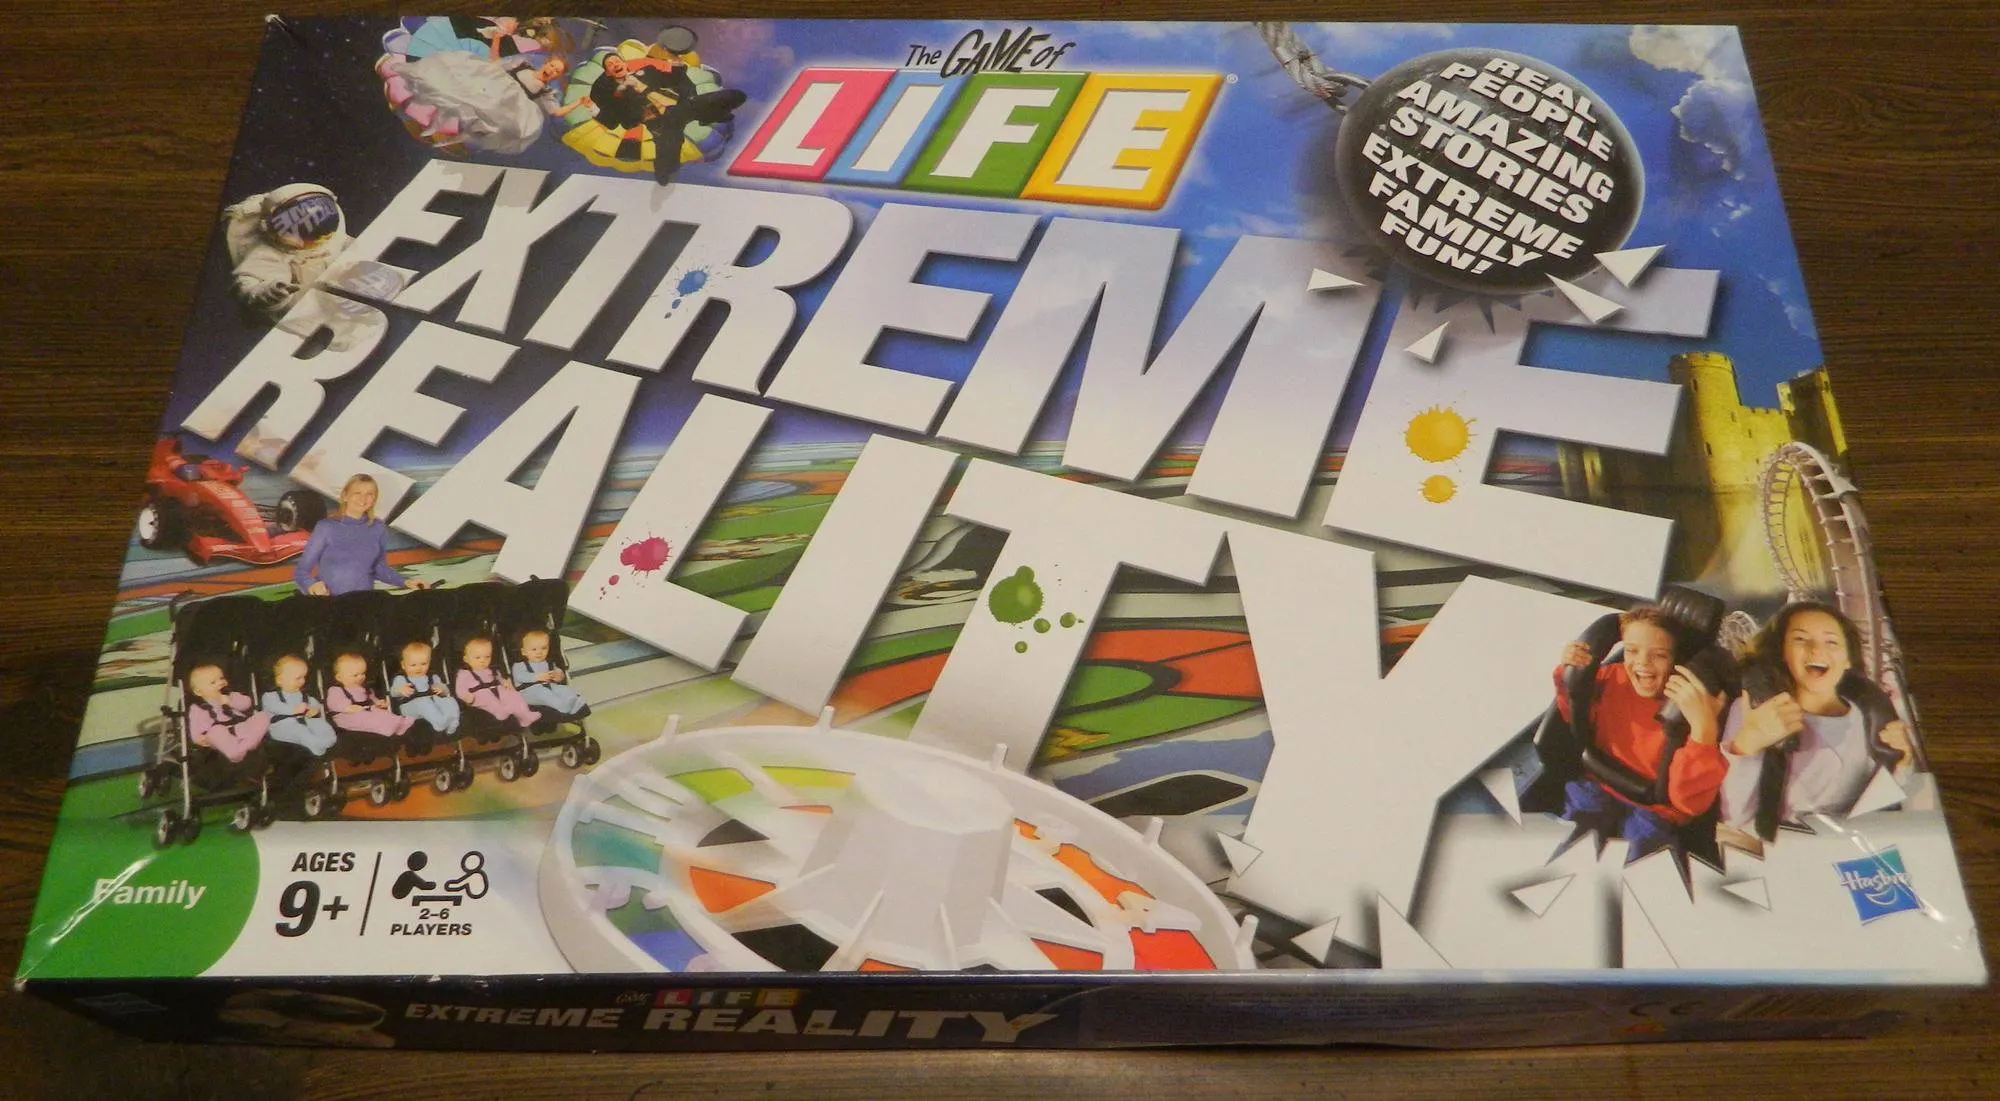 The Game of Life Rivals Edition Board Game; 2 Player Game Instructions,  Rules & Strategies - Hasbro